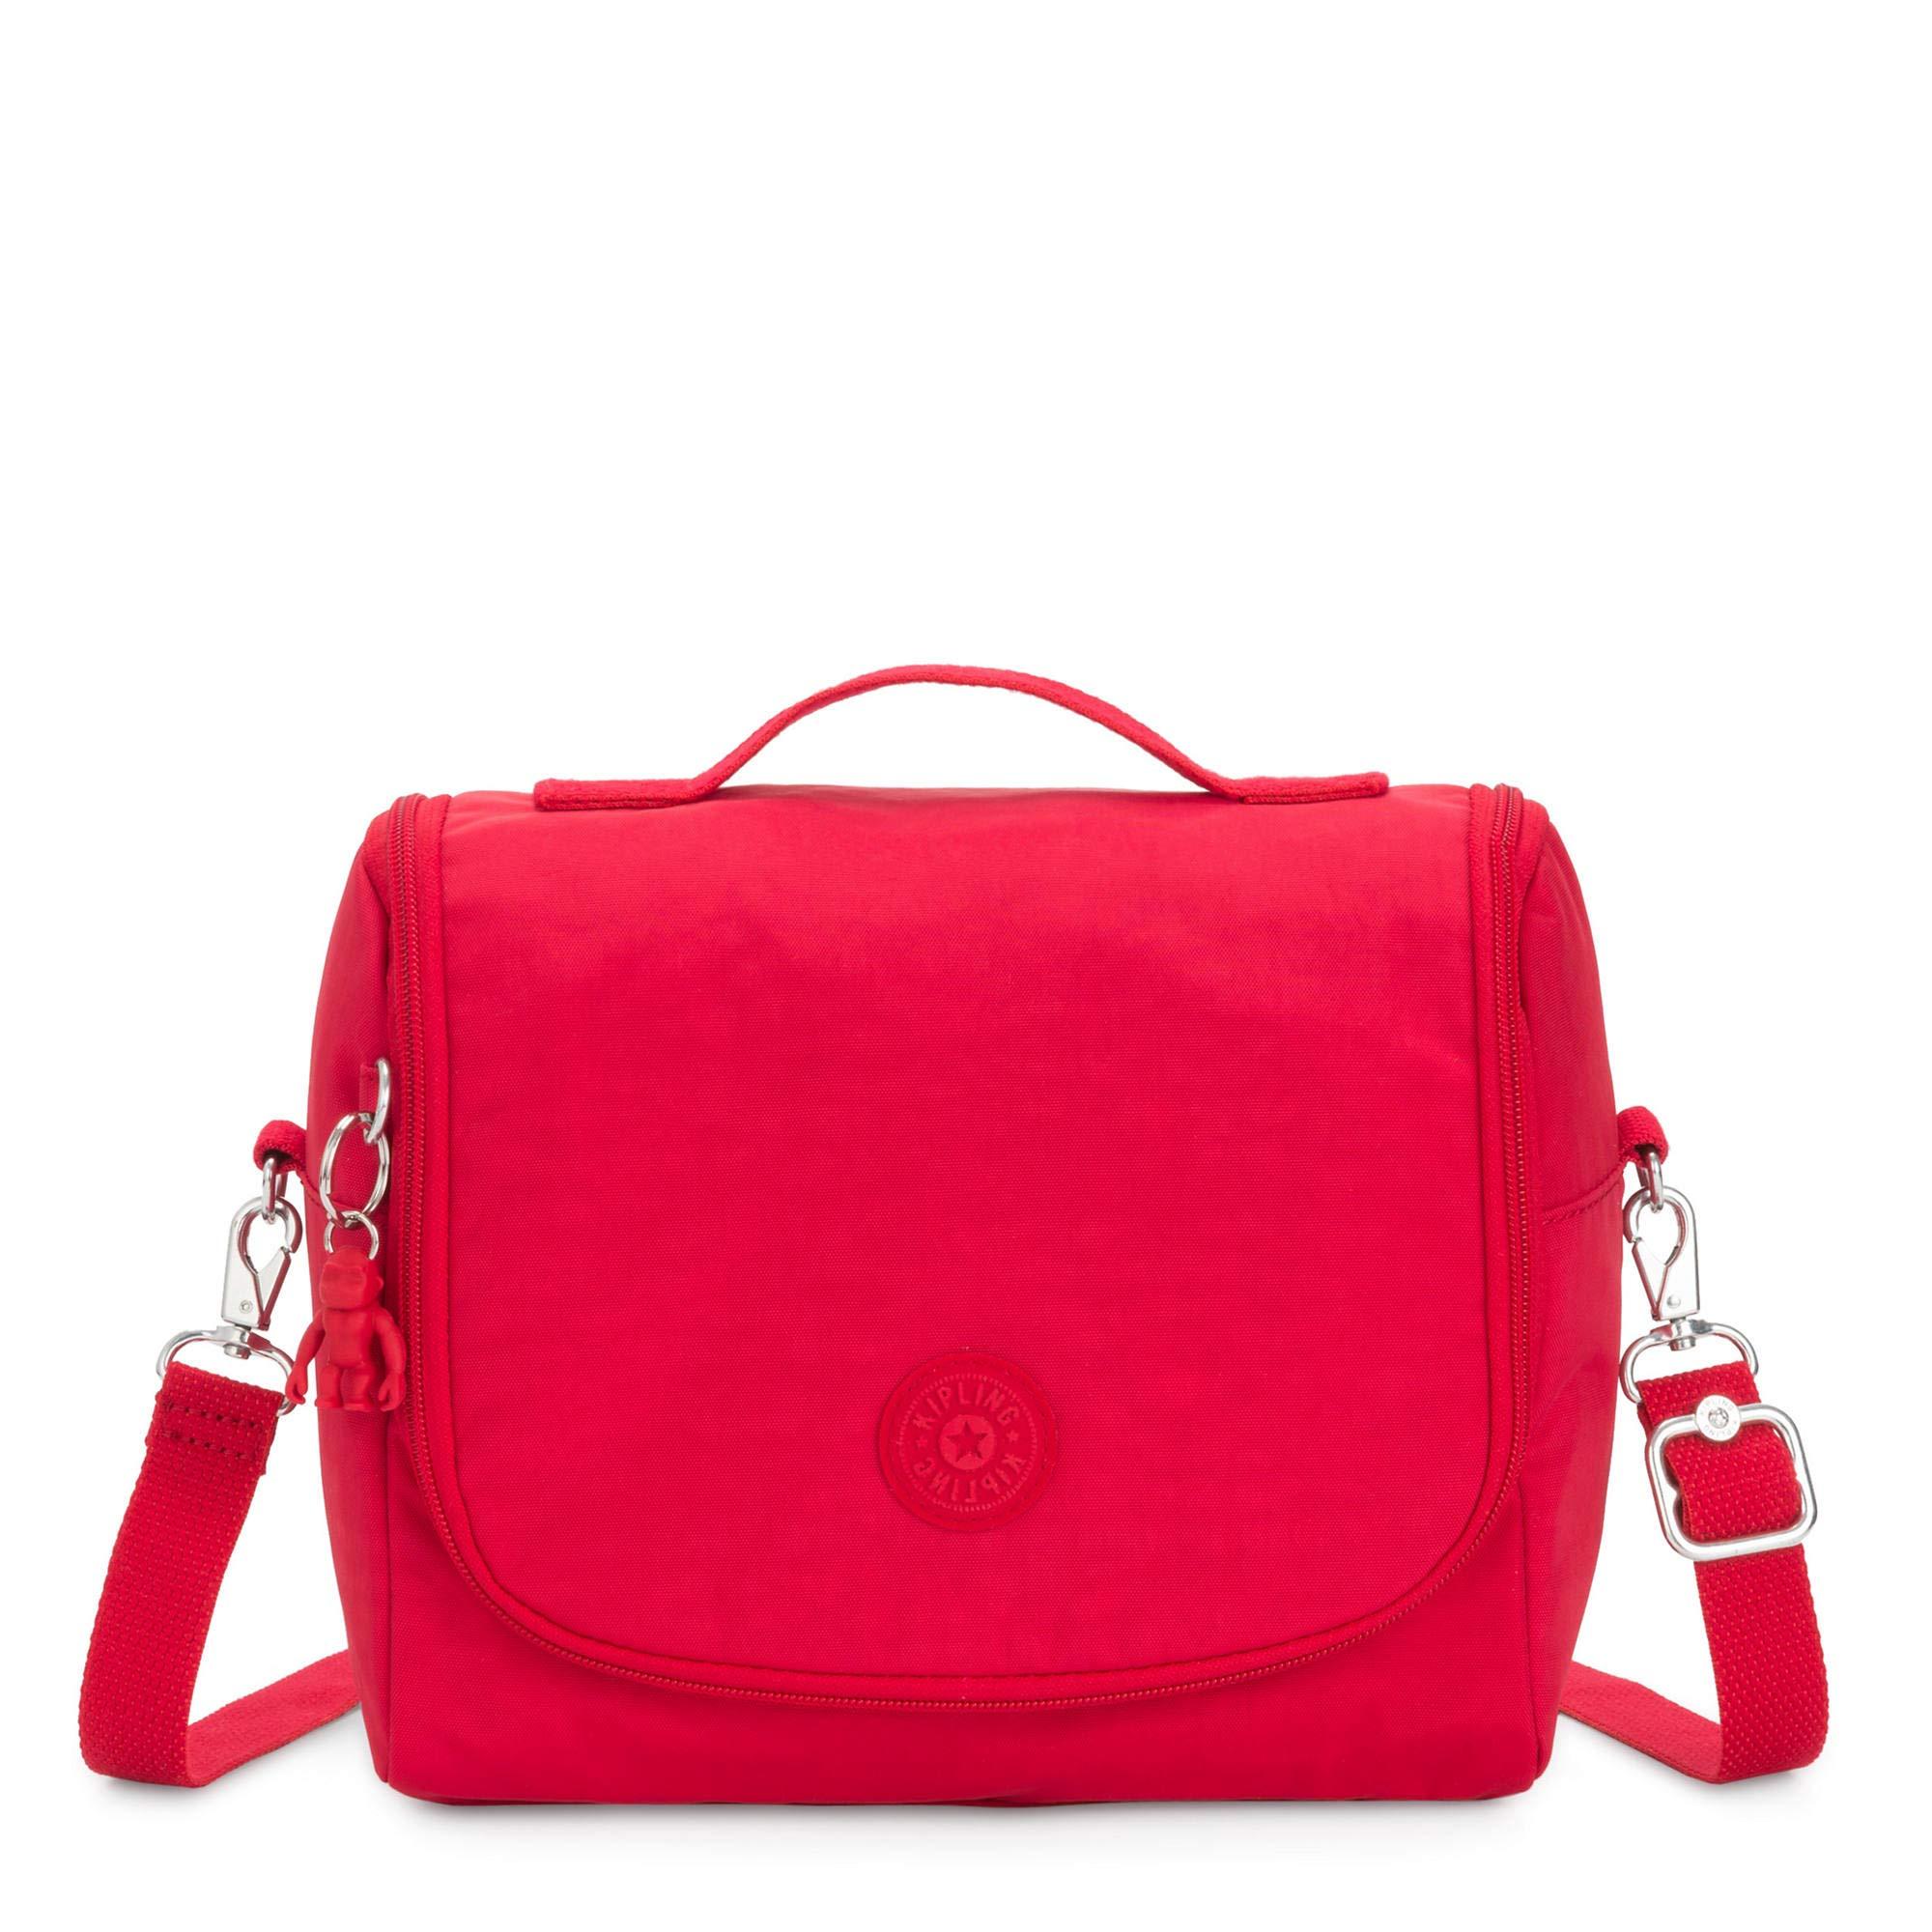 Kipling Synthetic Kichirou Insulated Lunch Bag in Red - Lyst